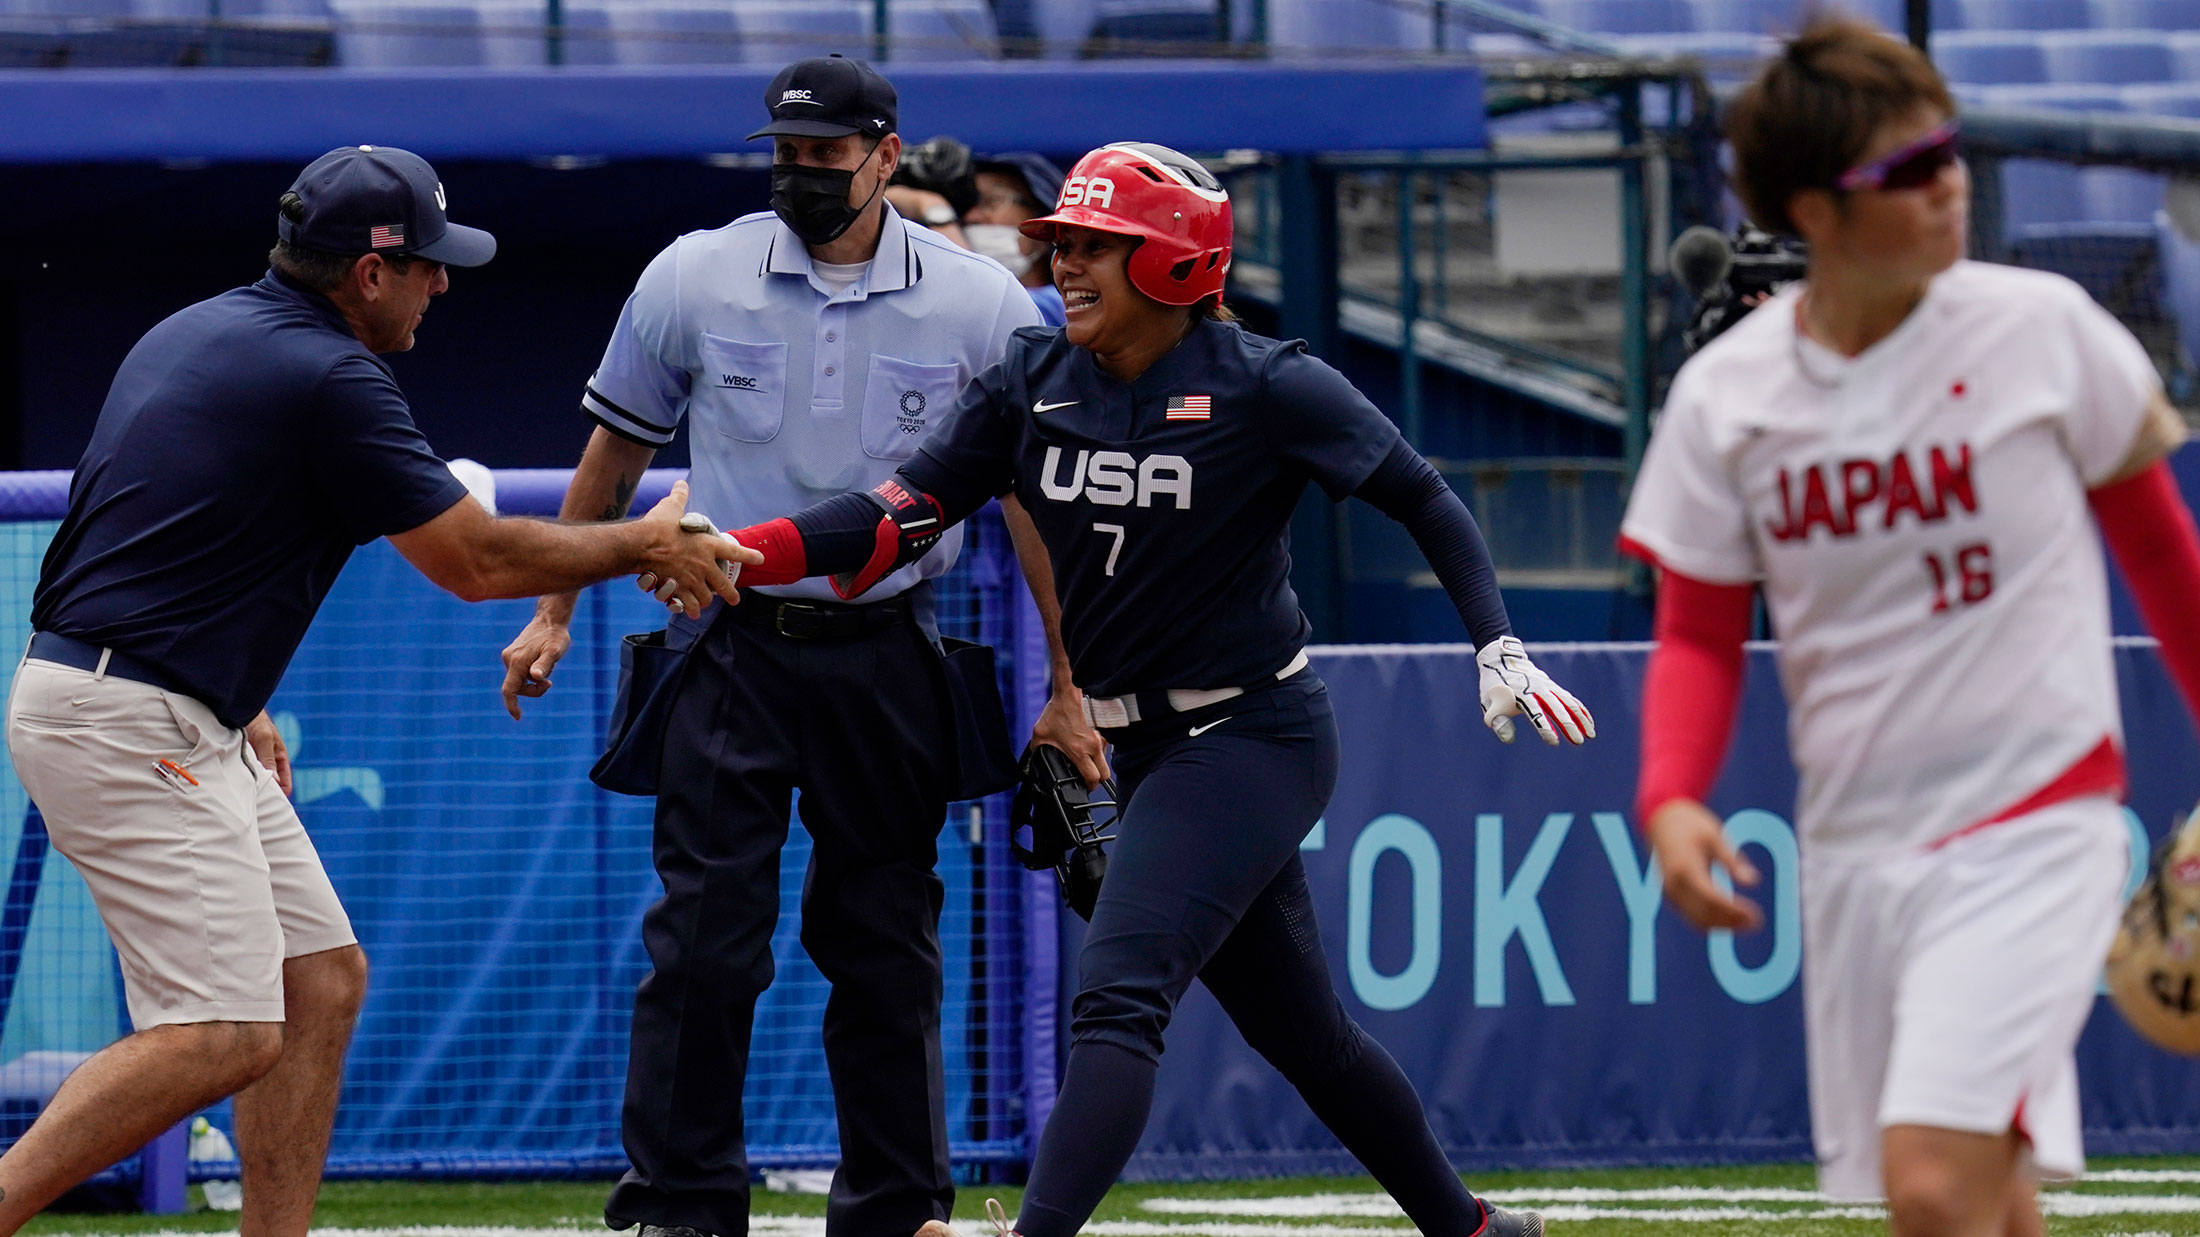 Watch Live Team Usa Softball Looking To Win Gold Against Japan In Tokyo Olympics